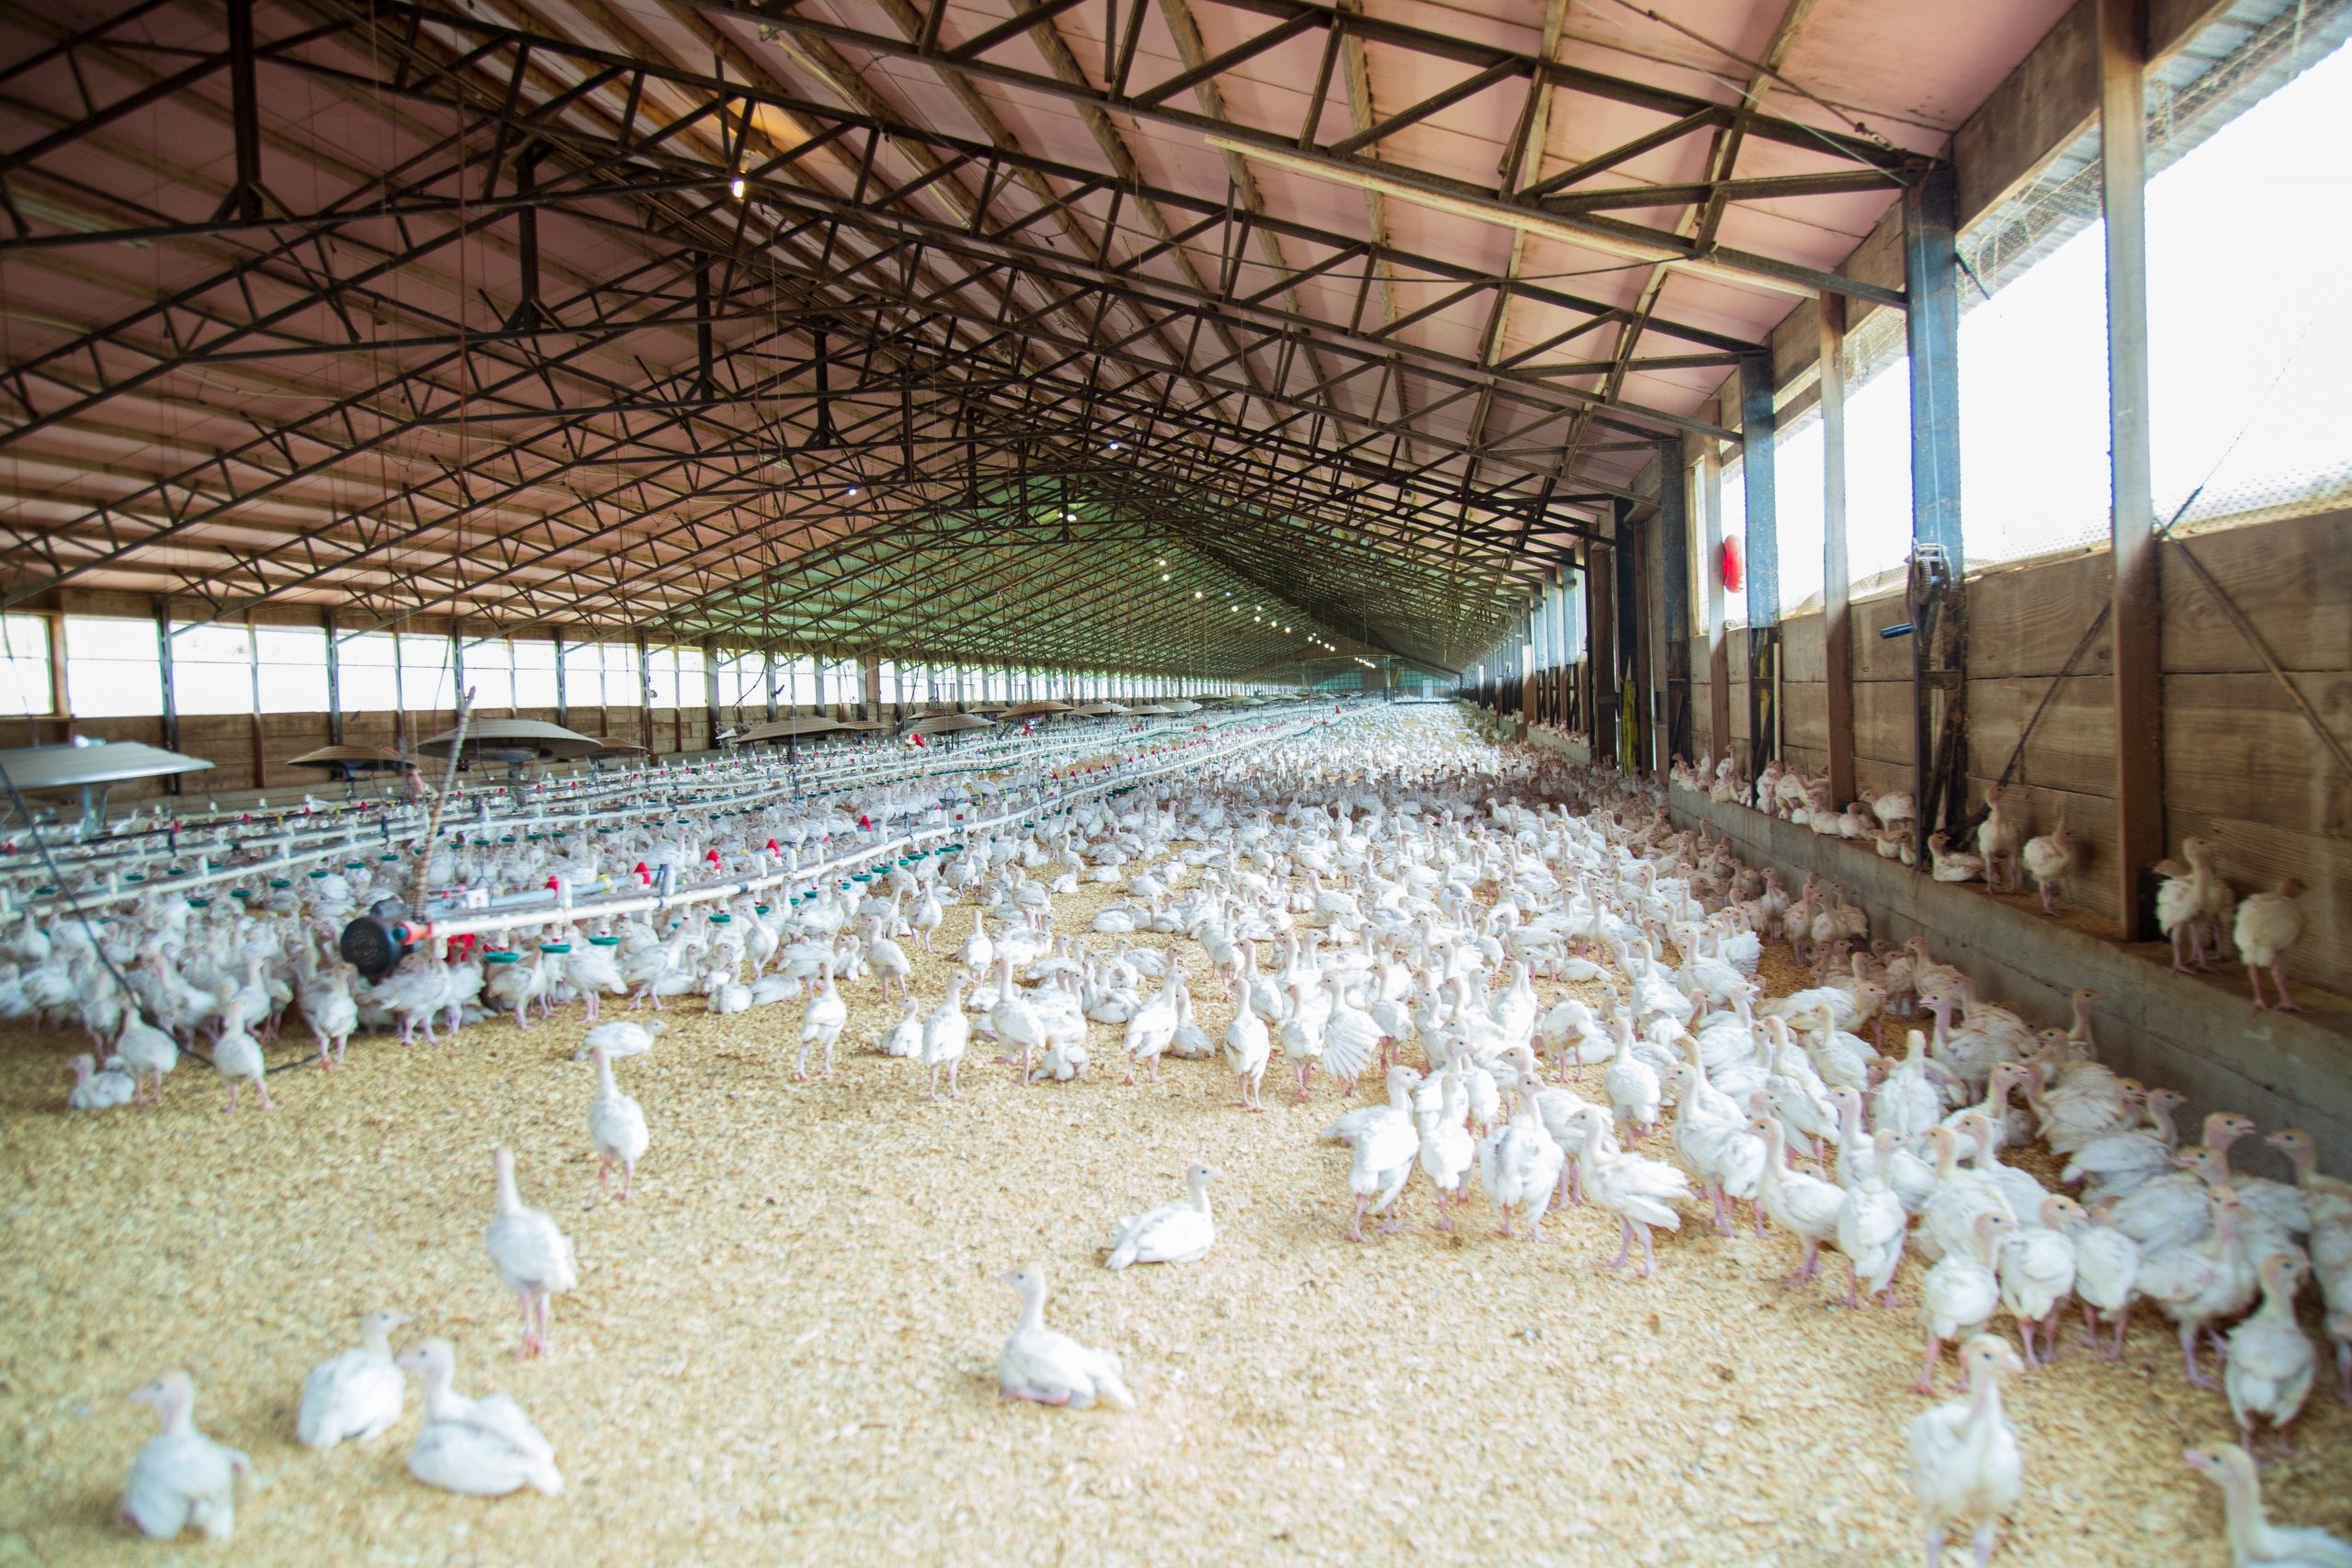 Demand for Cage-Free Eggs in Hong Kong to increase by 140 Million eggs annually